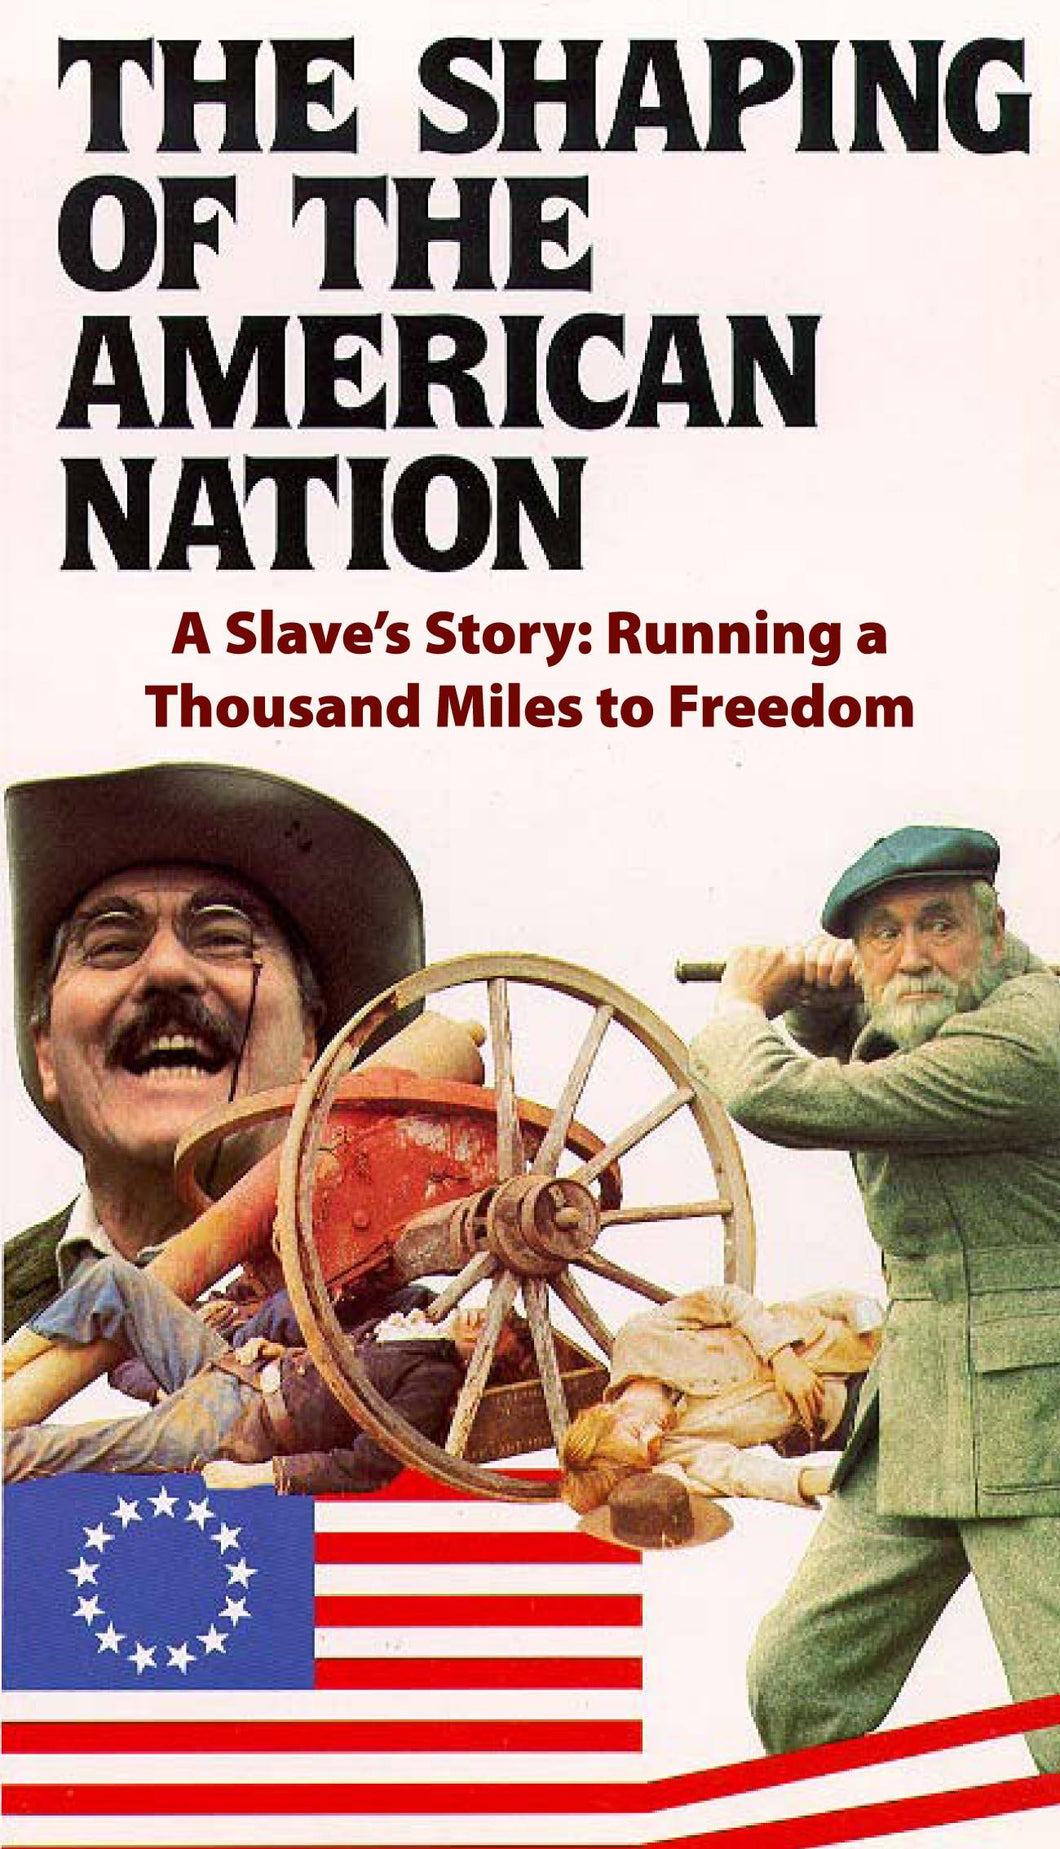 Slave Story: Running a 1,000 Miles to Freedom